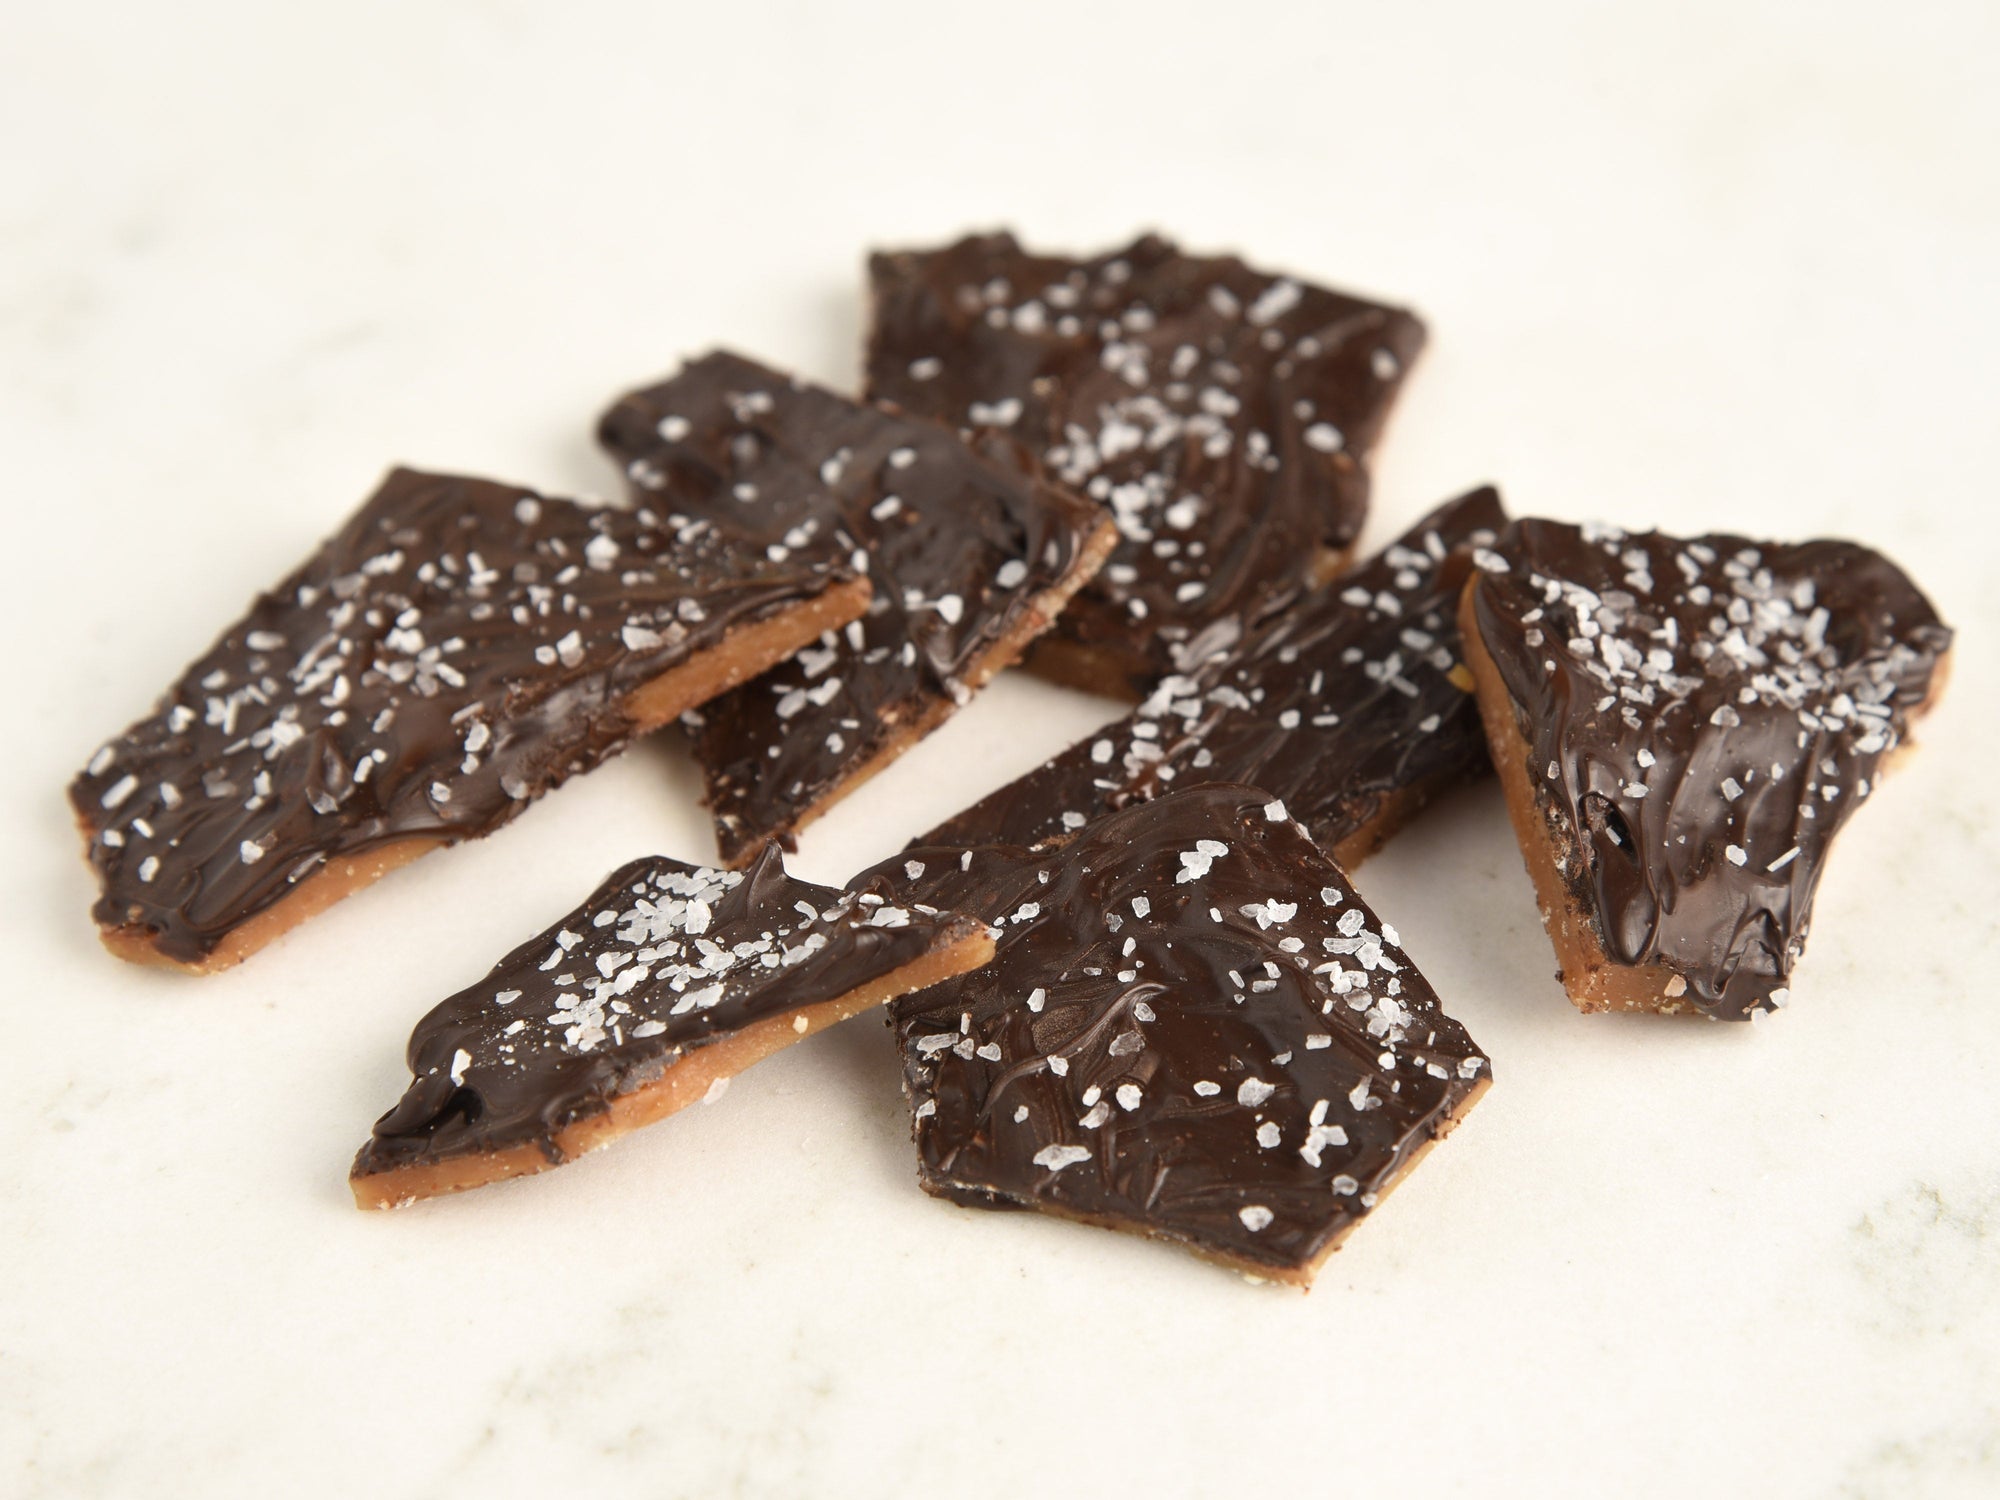 Cracked Toffee with sea salt-WS